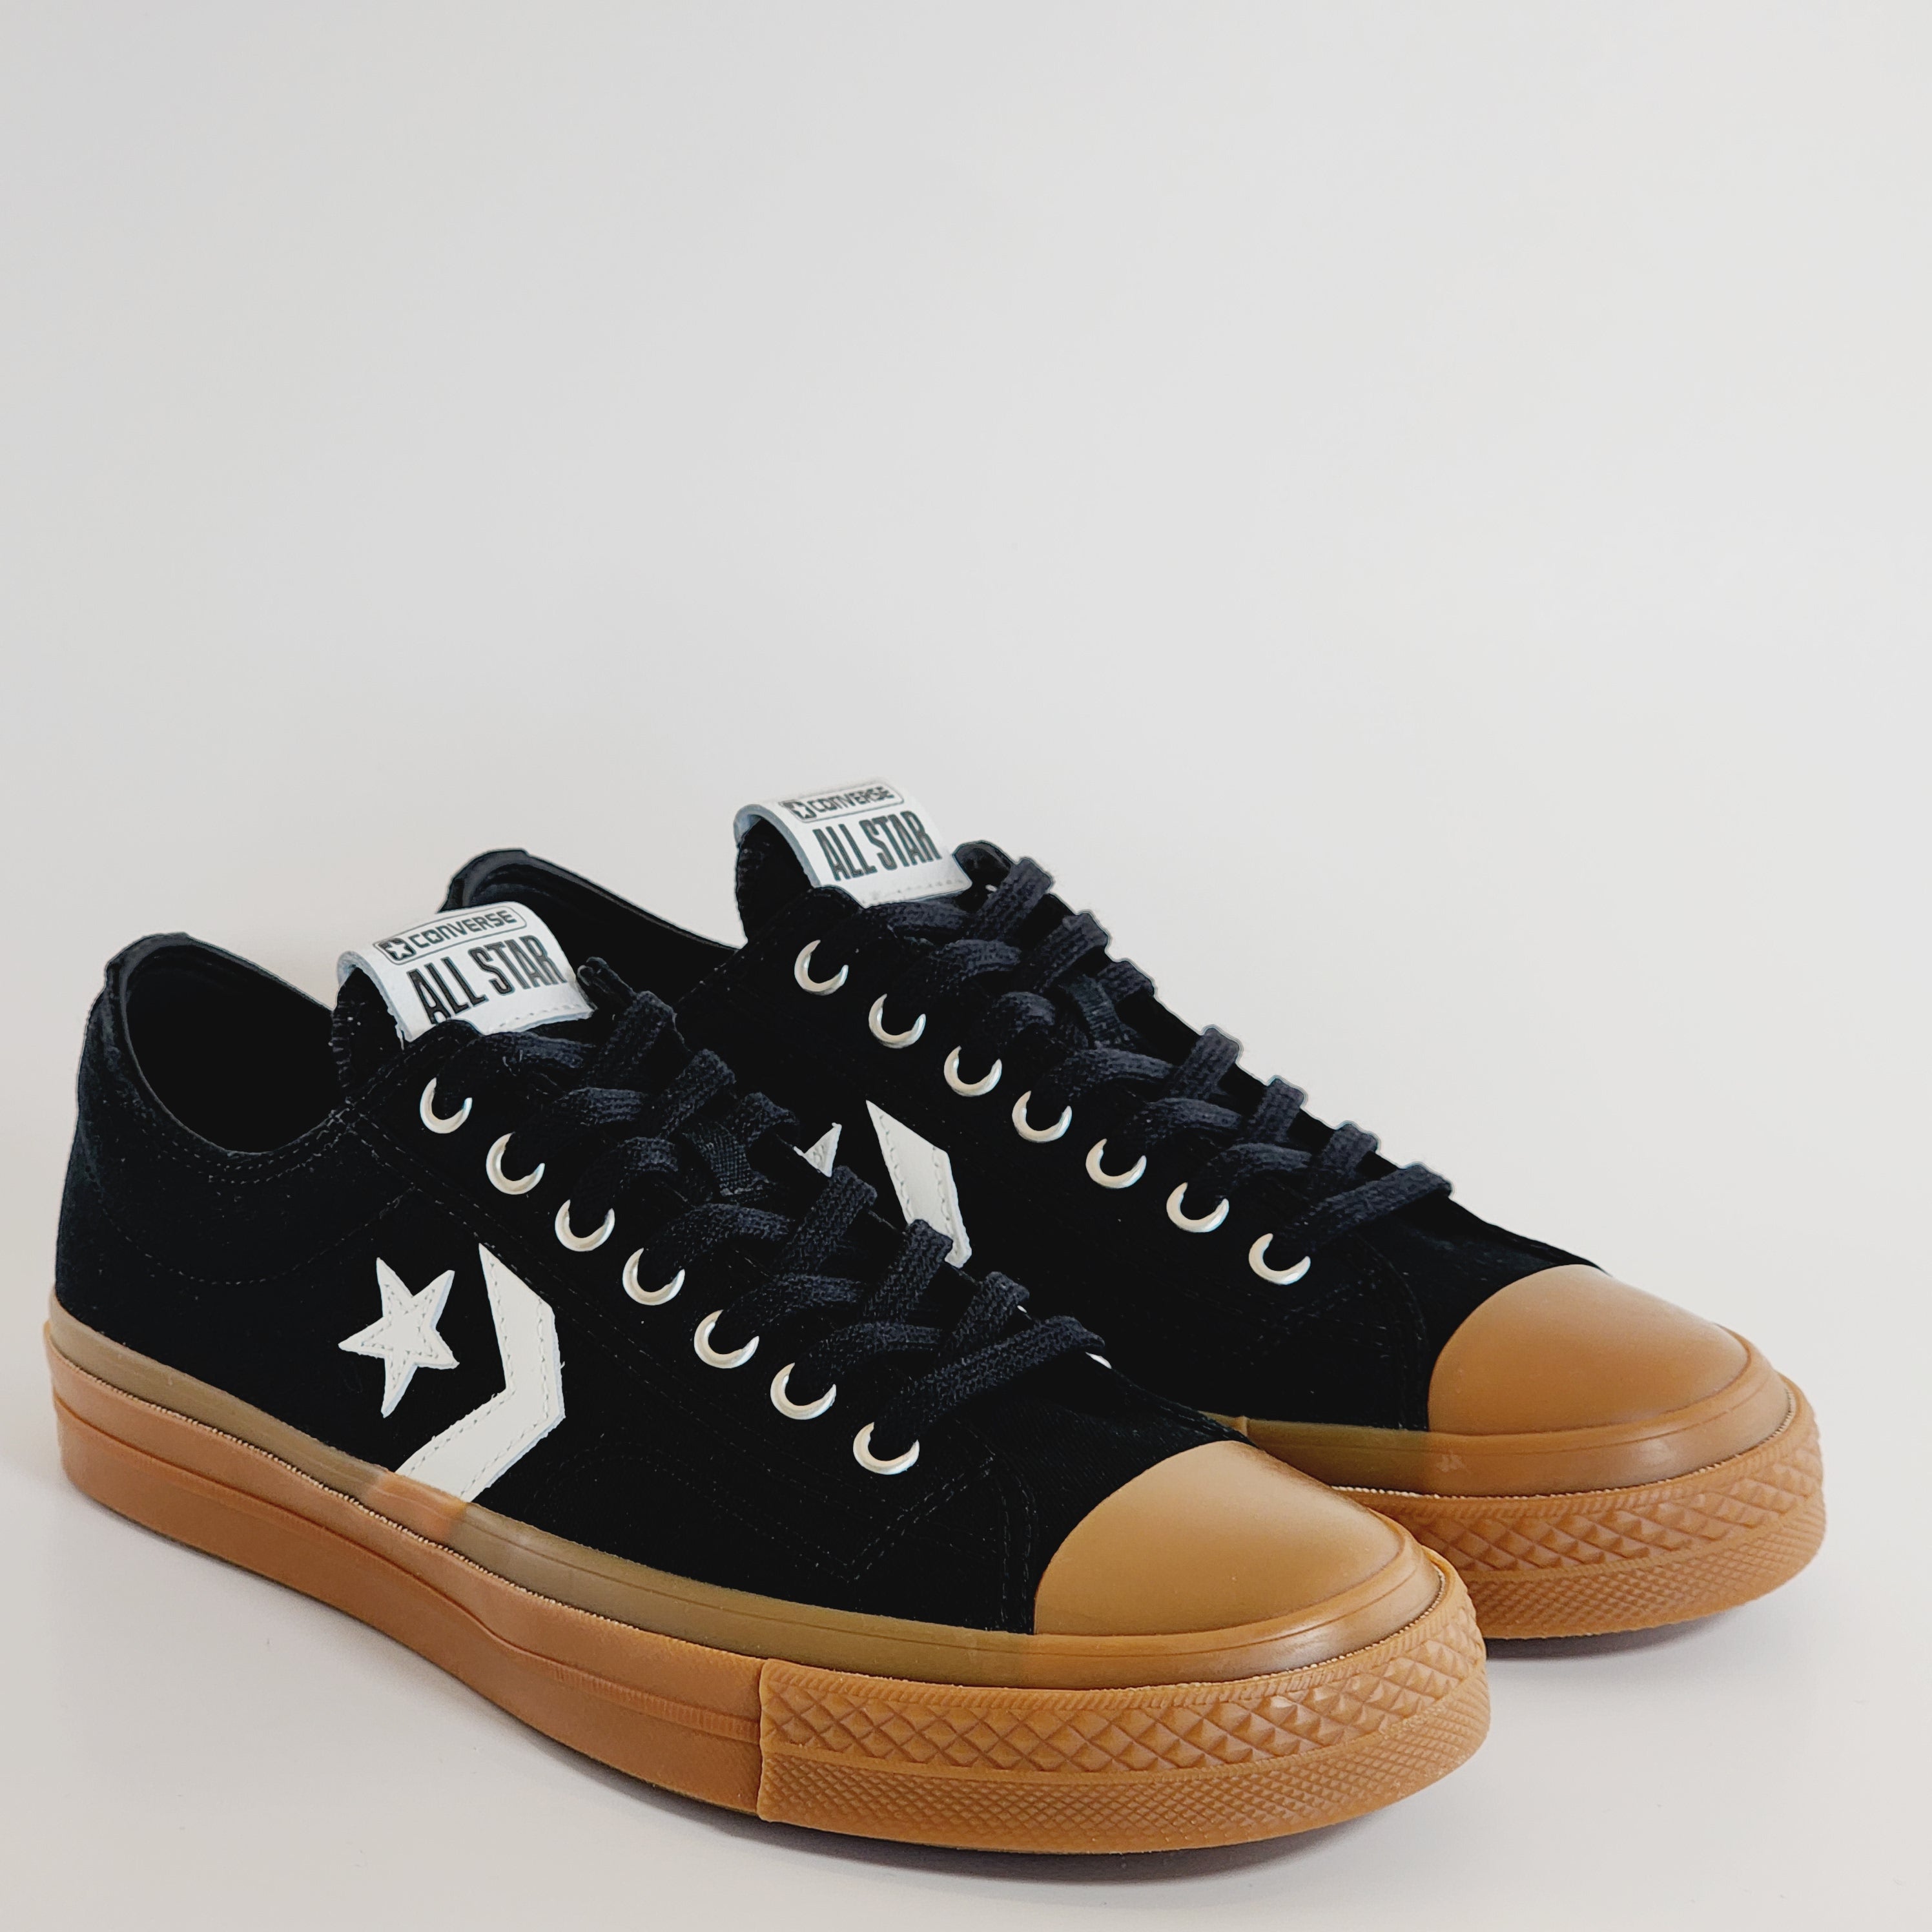 Converse Star Player 76 Low Ox Black/Vintage White/Gum Unisex Sneakers A08847C